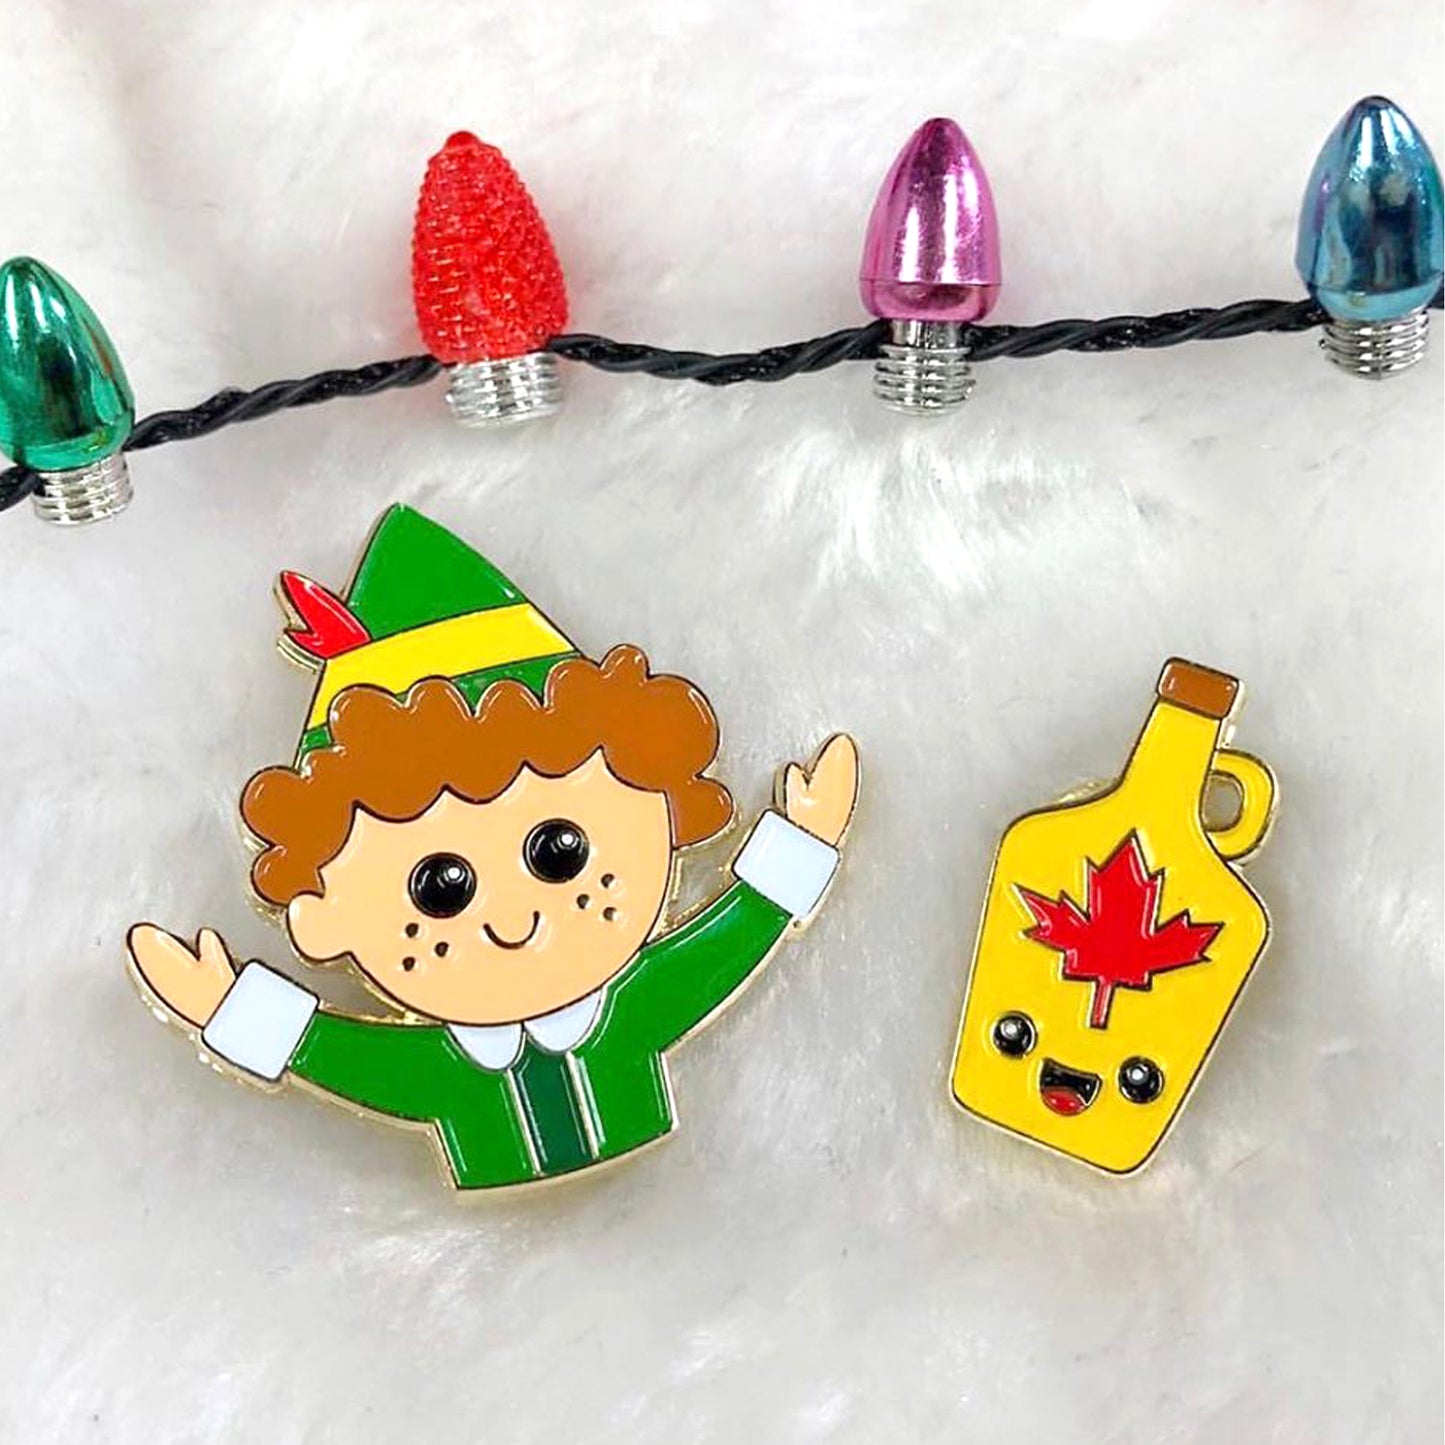 Buddy the Elf and Maple Syrup enamel pin set with a string of lights